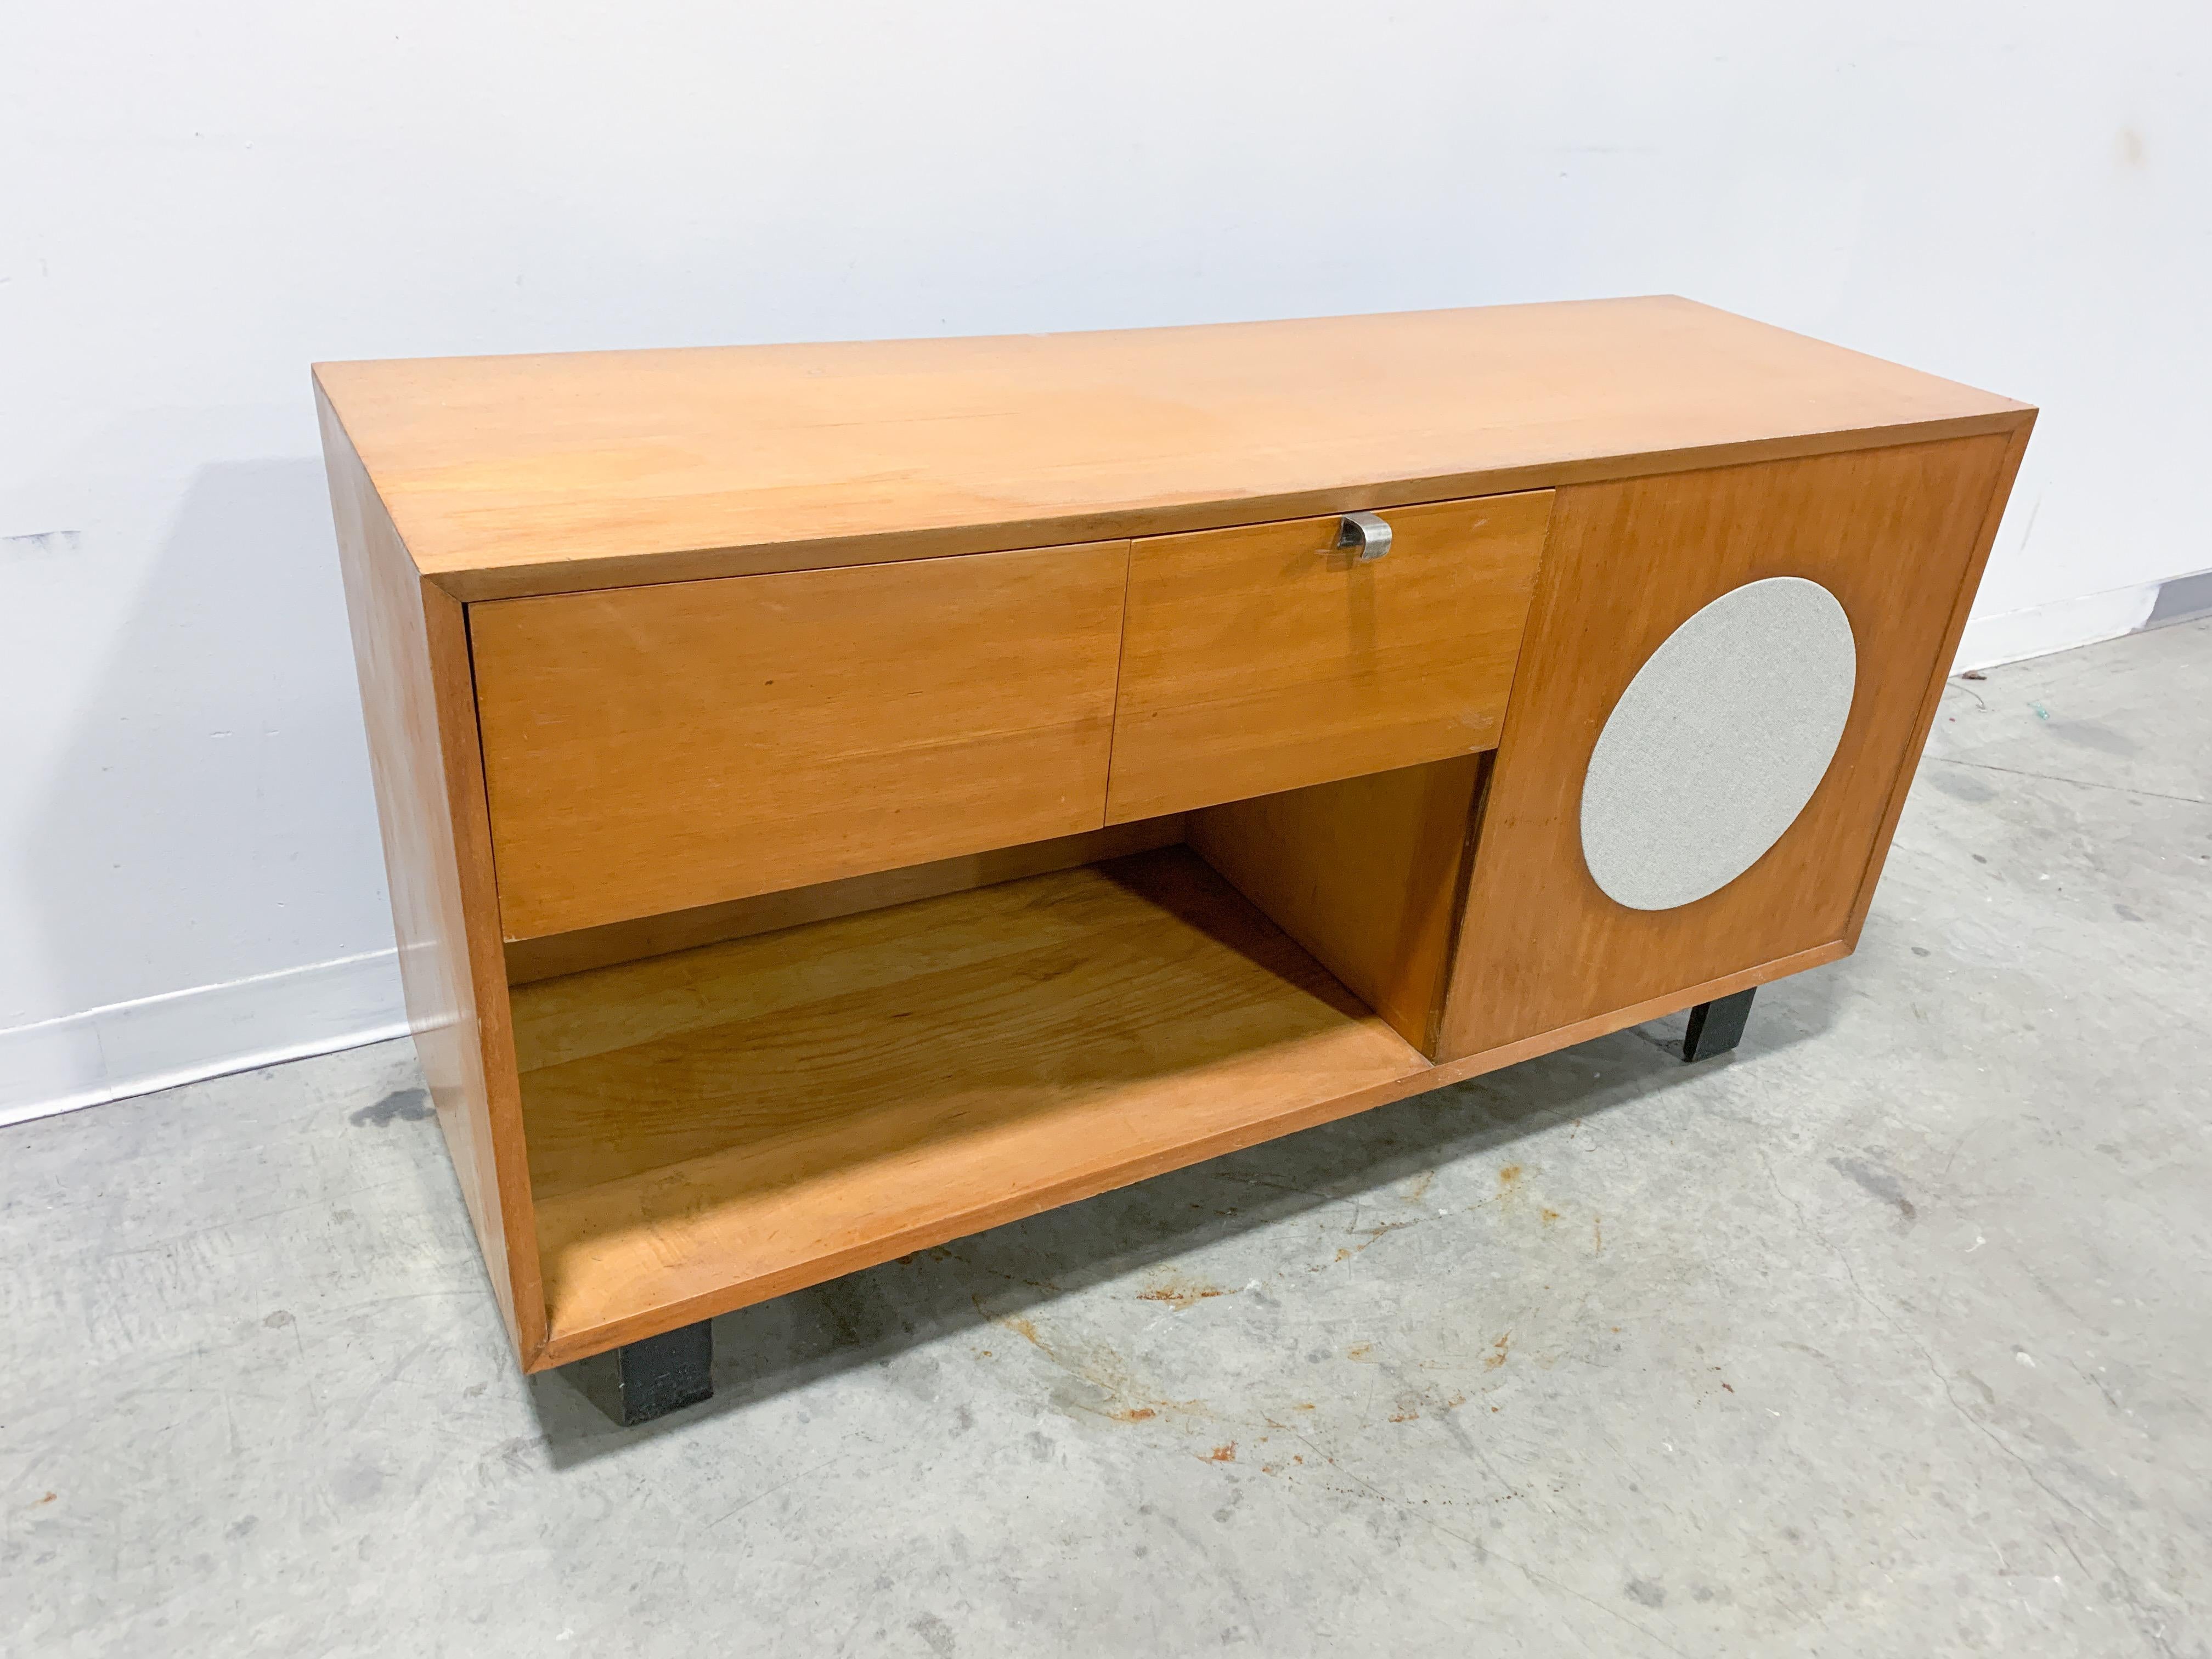 All original internals on this iconic music cabinet with speaker designed by George Nelson for Herman Miller’s BCS series. Early 1950s primavera veneered case in good vintage condition with new speaker grill fabric and original high contrast black